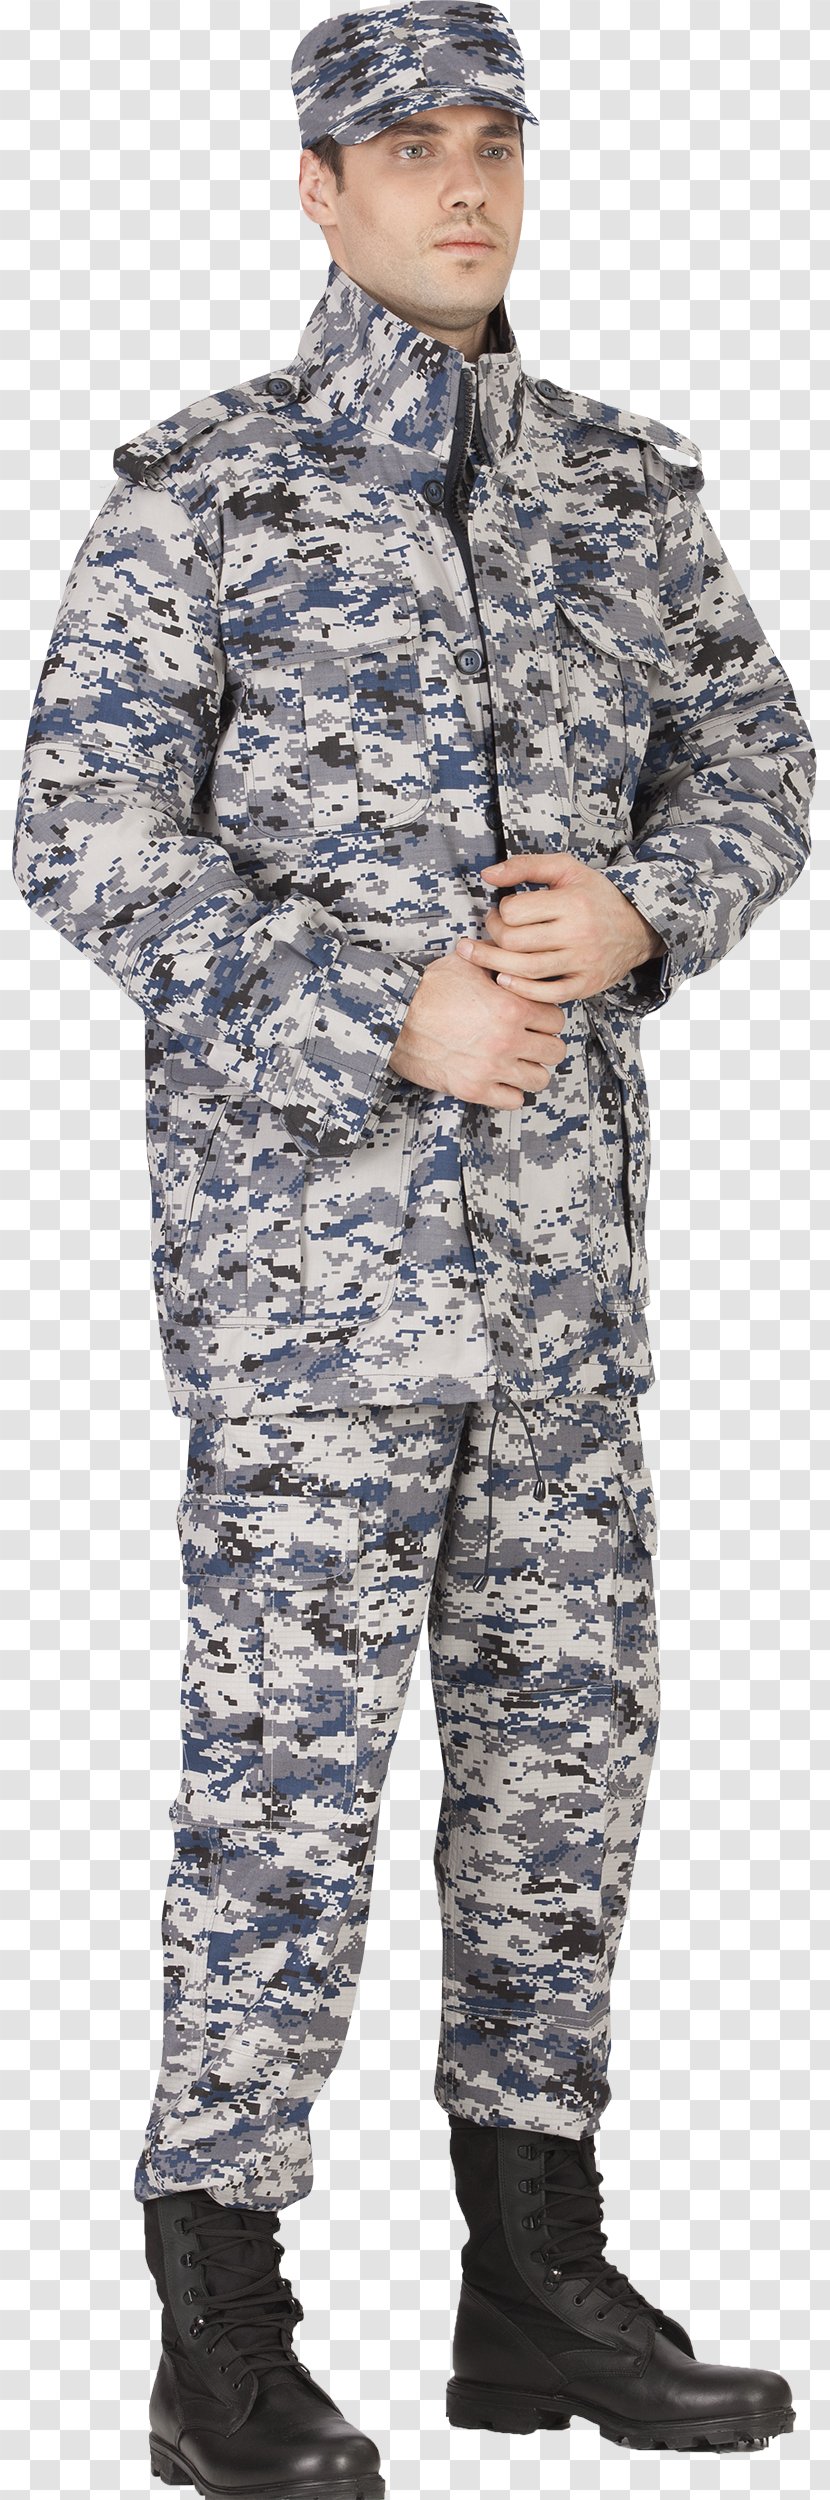 Military Camouflage Soldier Army Transparent PNG